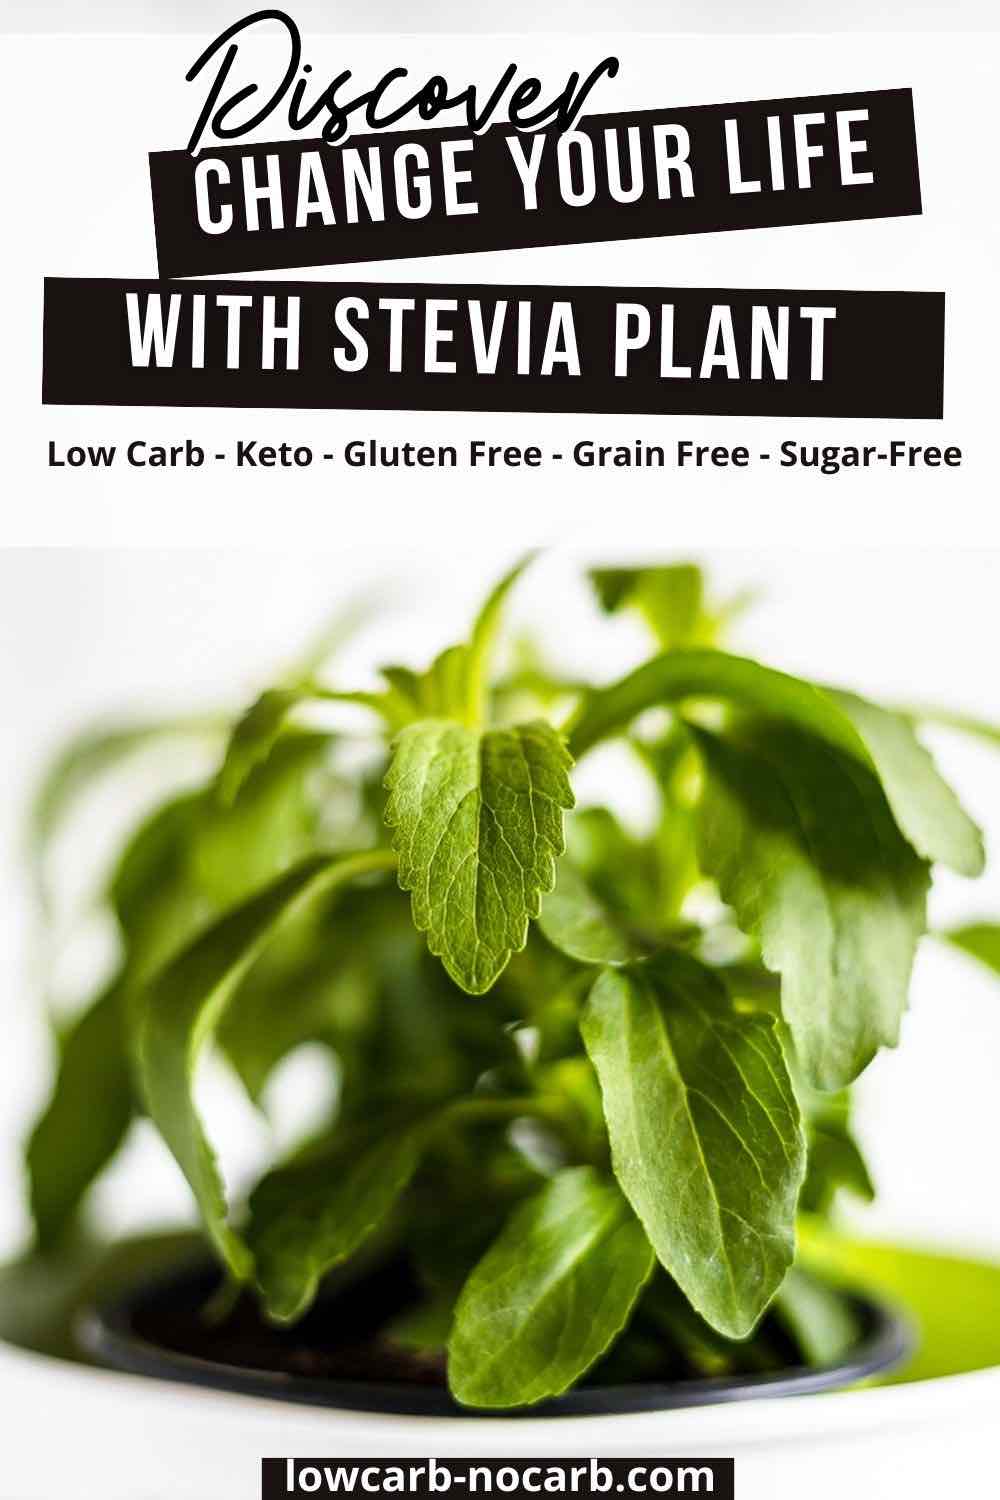 Stevia pot with fresh leaves.